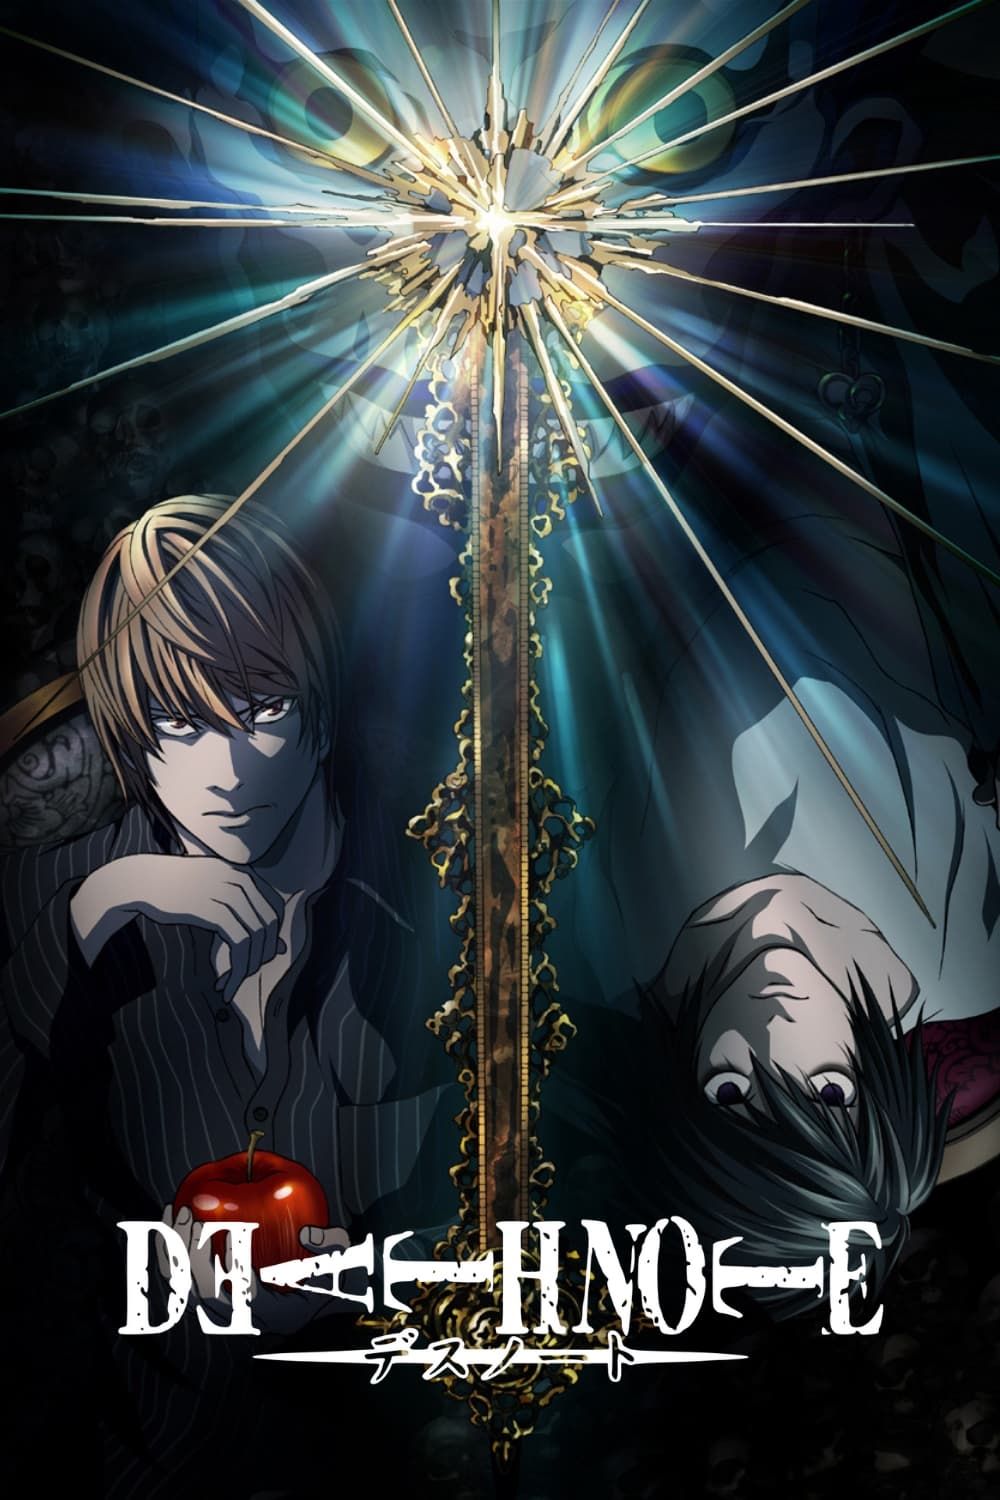 Light Yagami, L and Ryuk posing in Death Note Anime Poster 